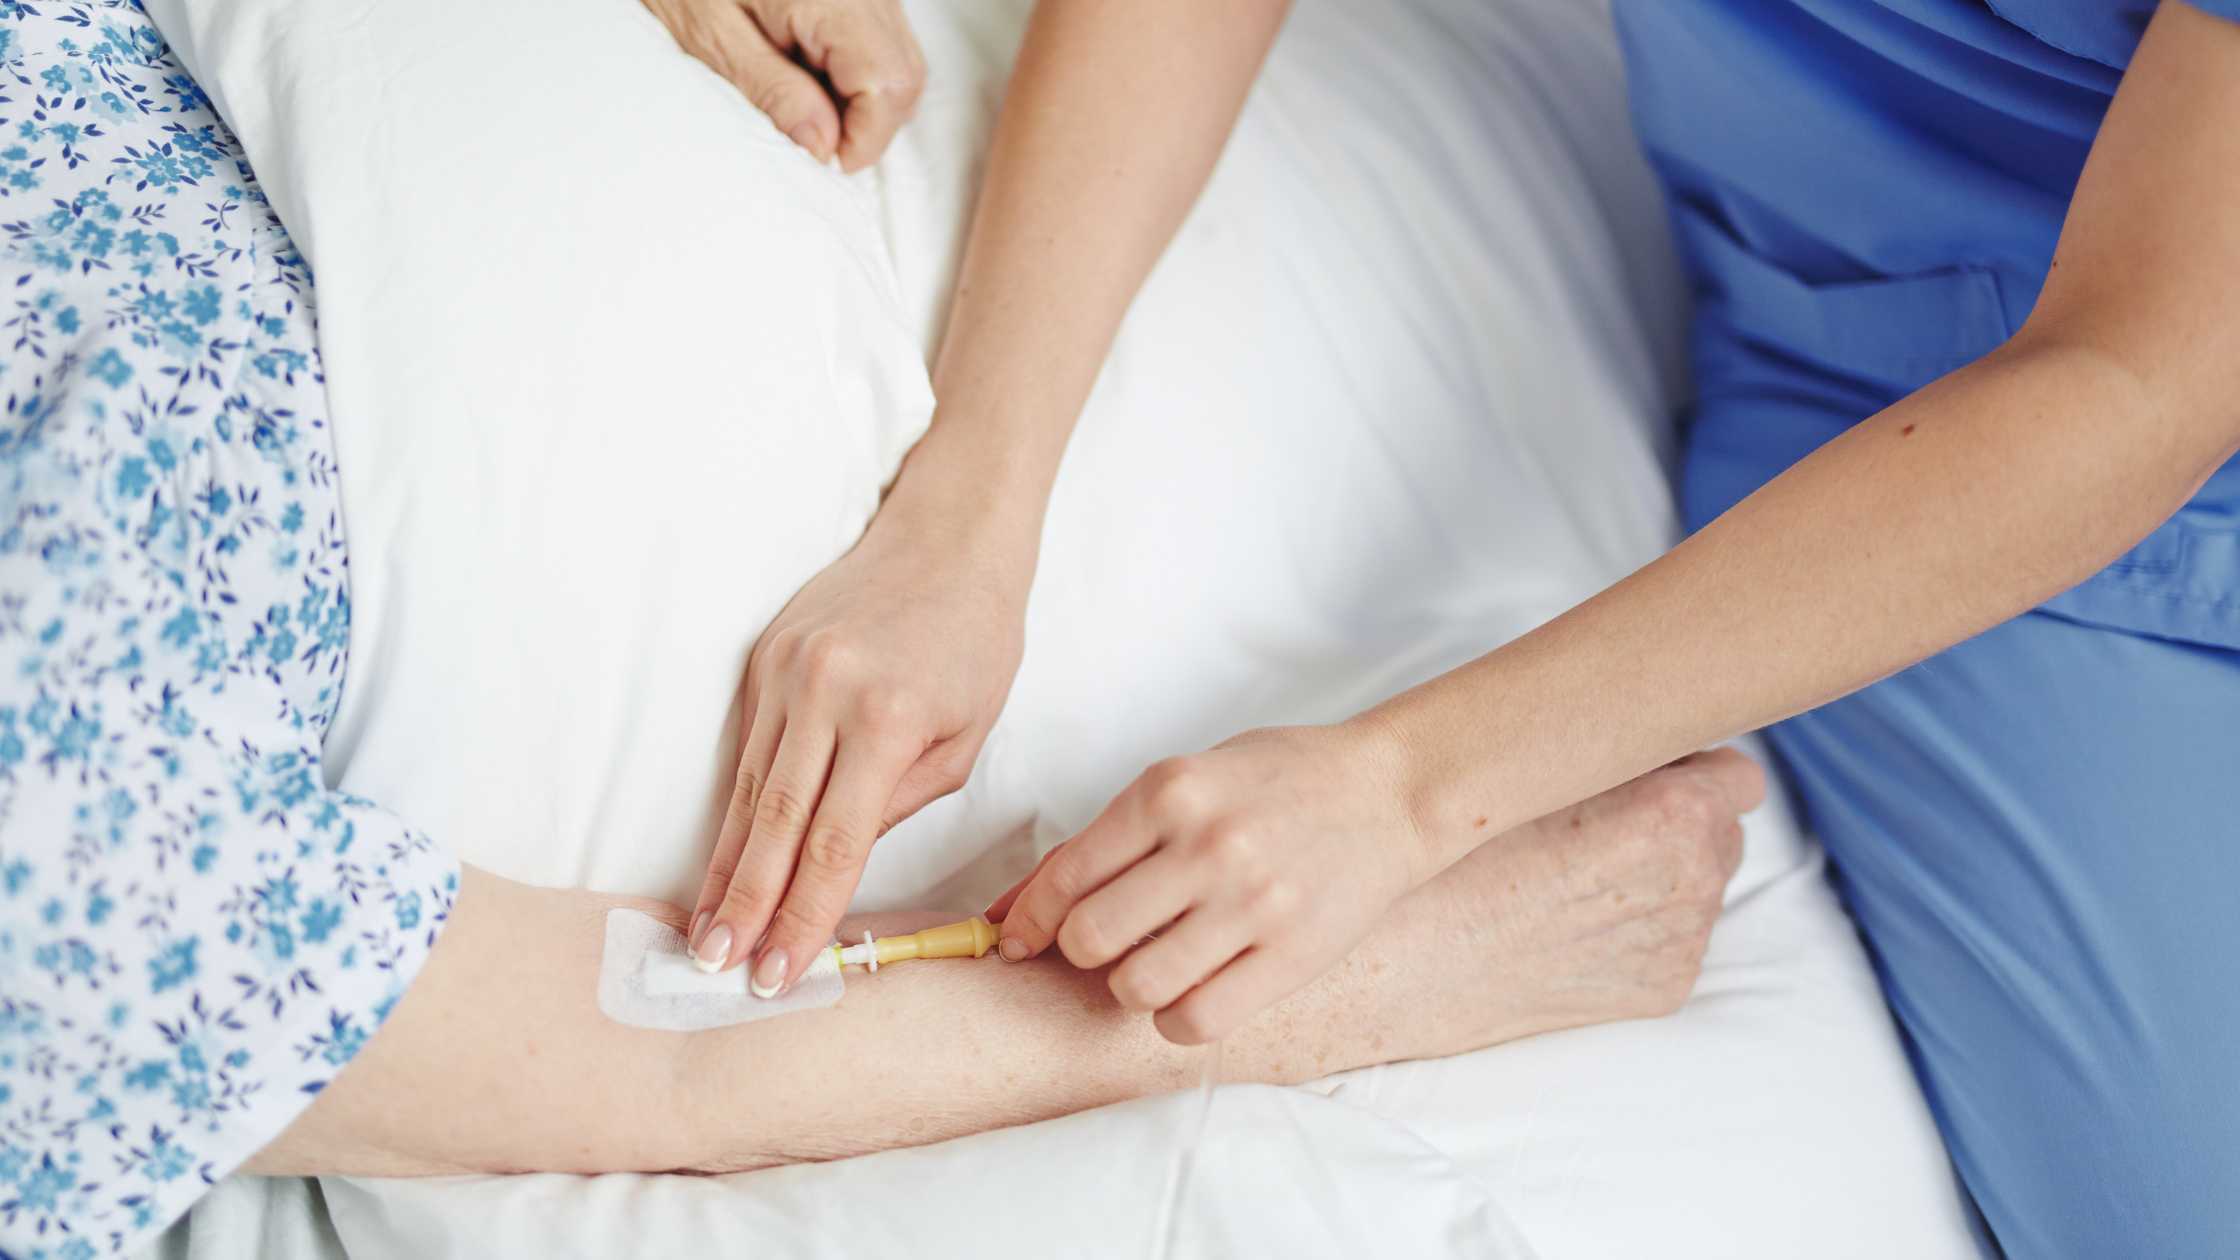 How to Become an Infusion Nurse: A Step-by-Step Guide